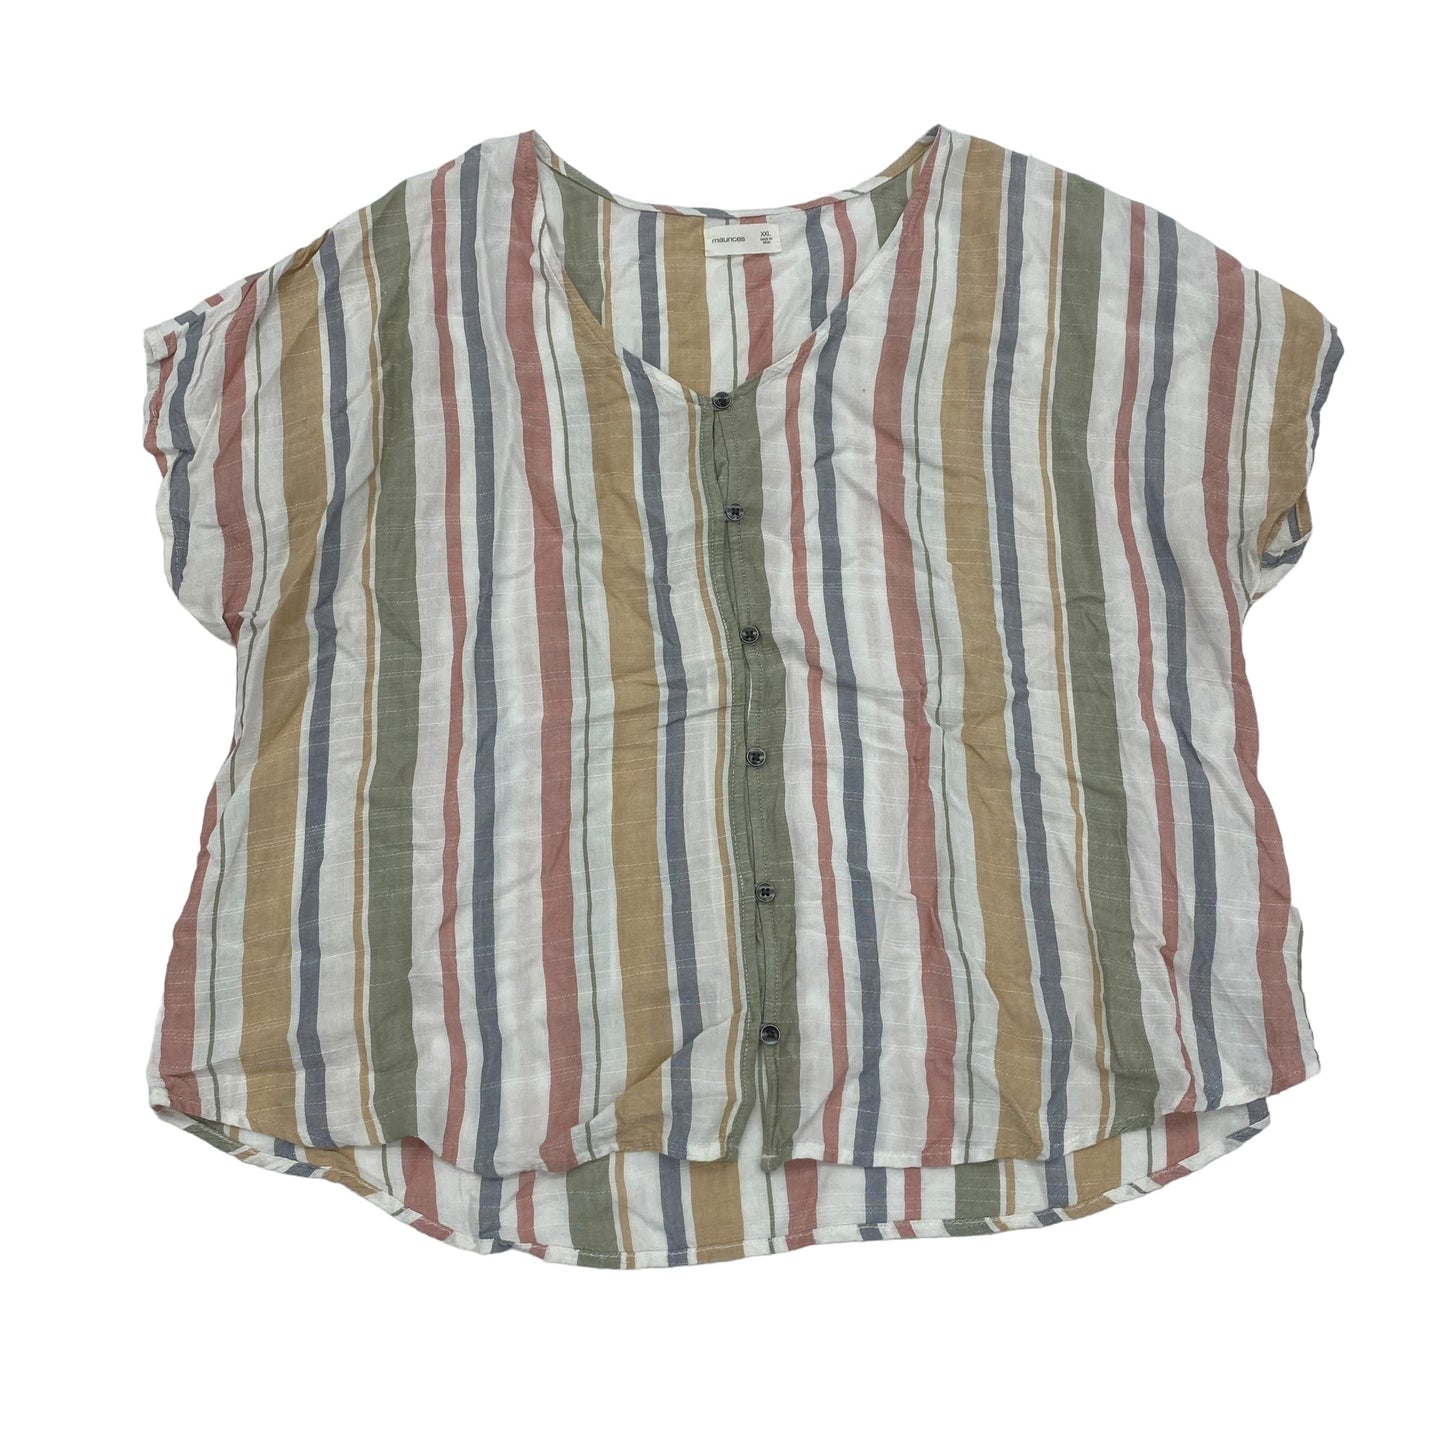 STRIPED PATTERN TOP SS by MAURICES Size:2X